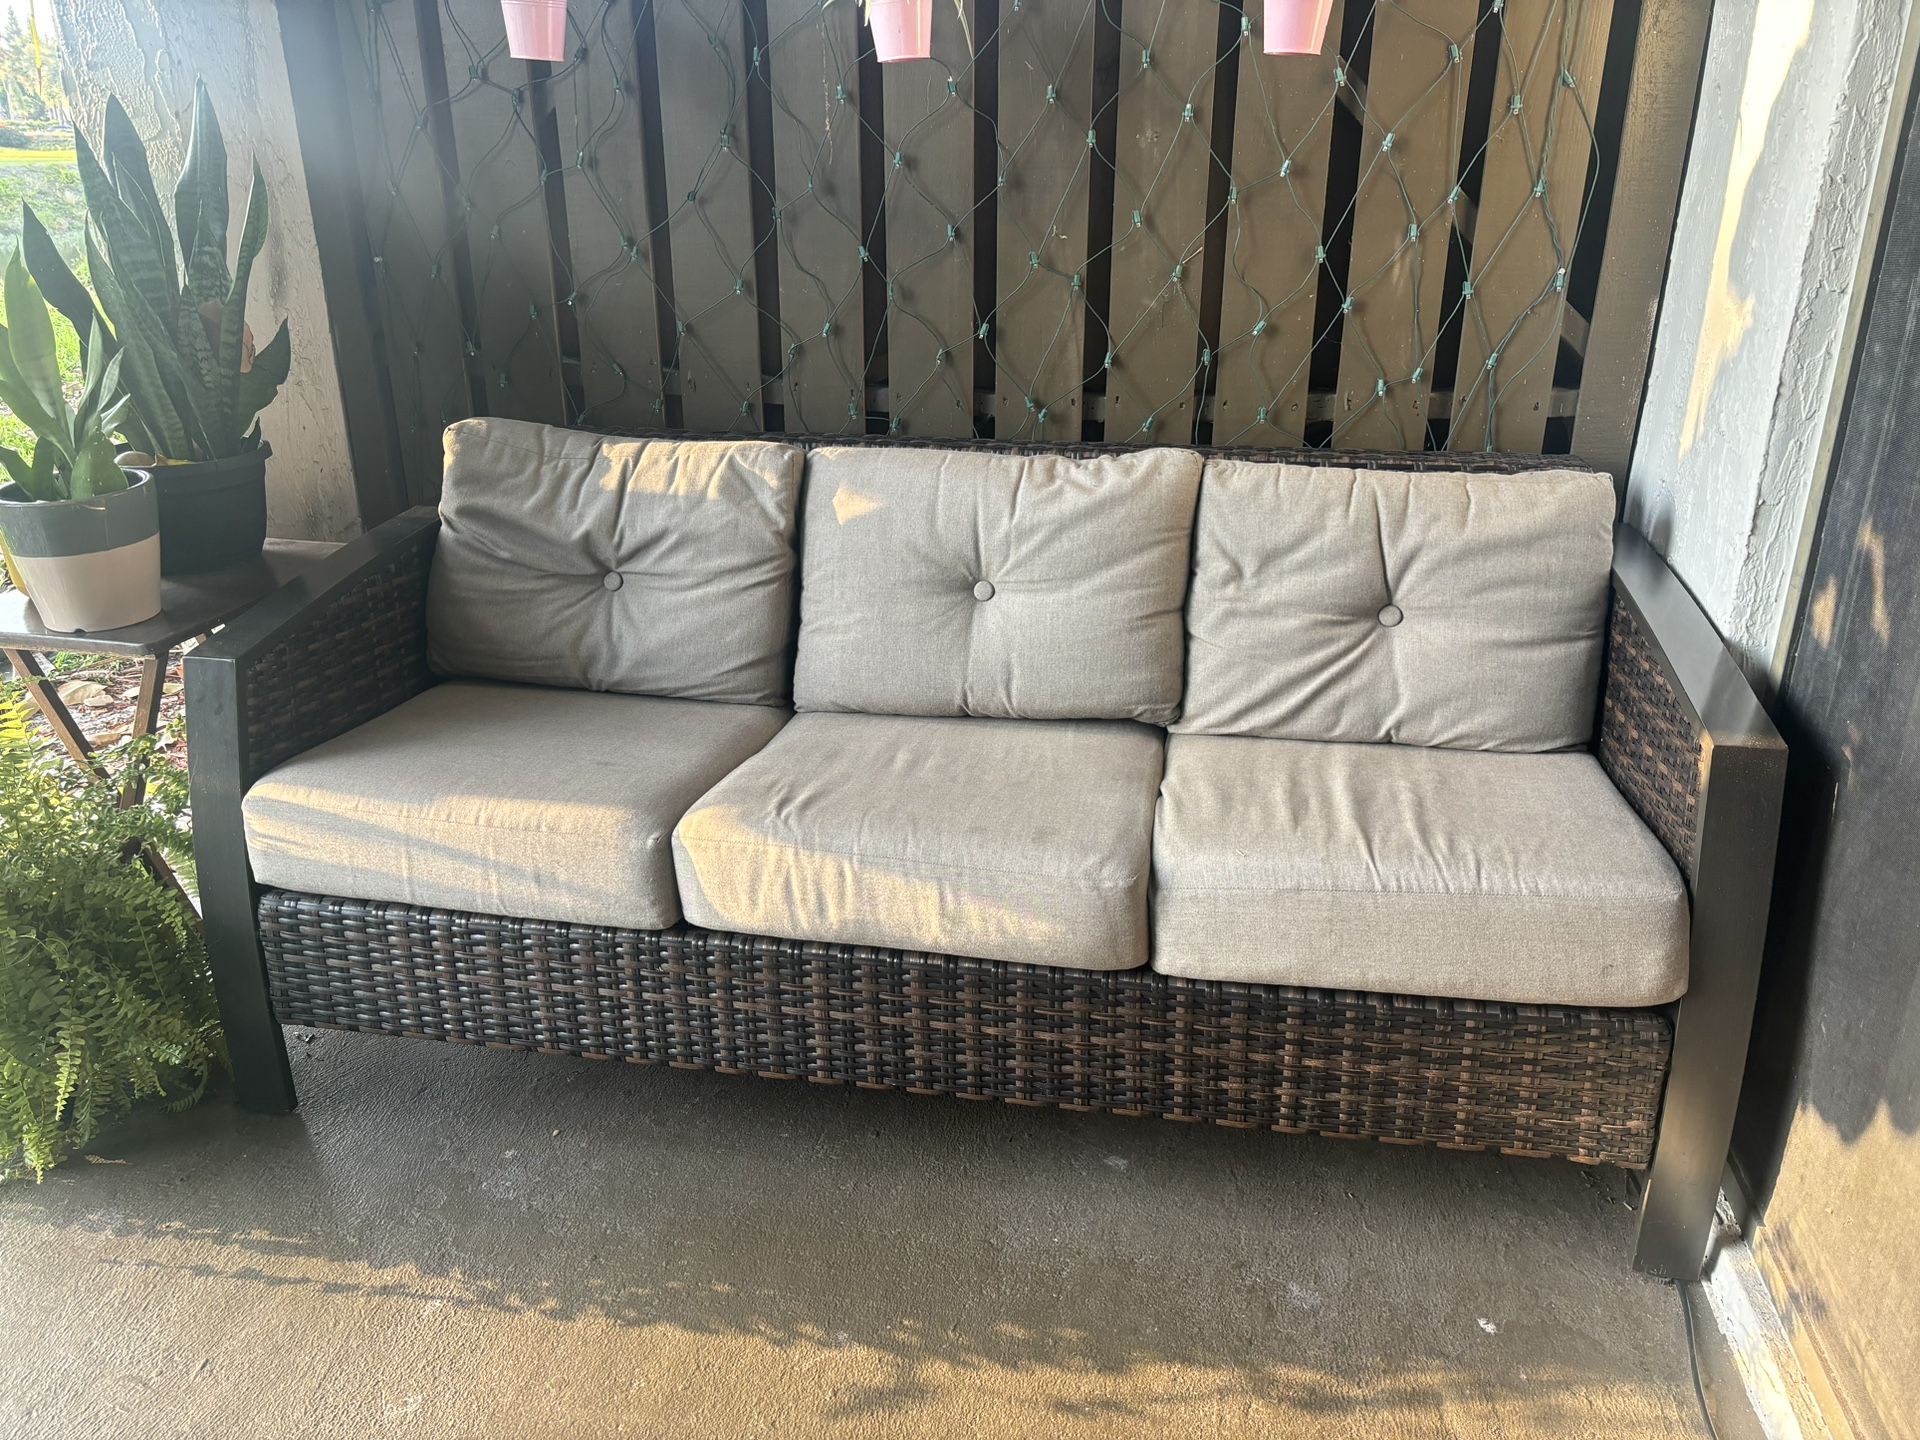 3 Seater Patio Couch